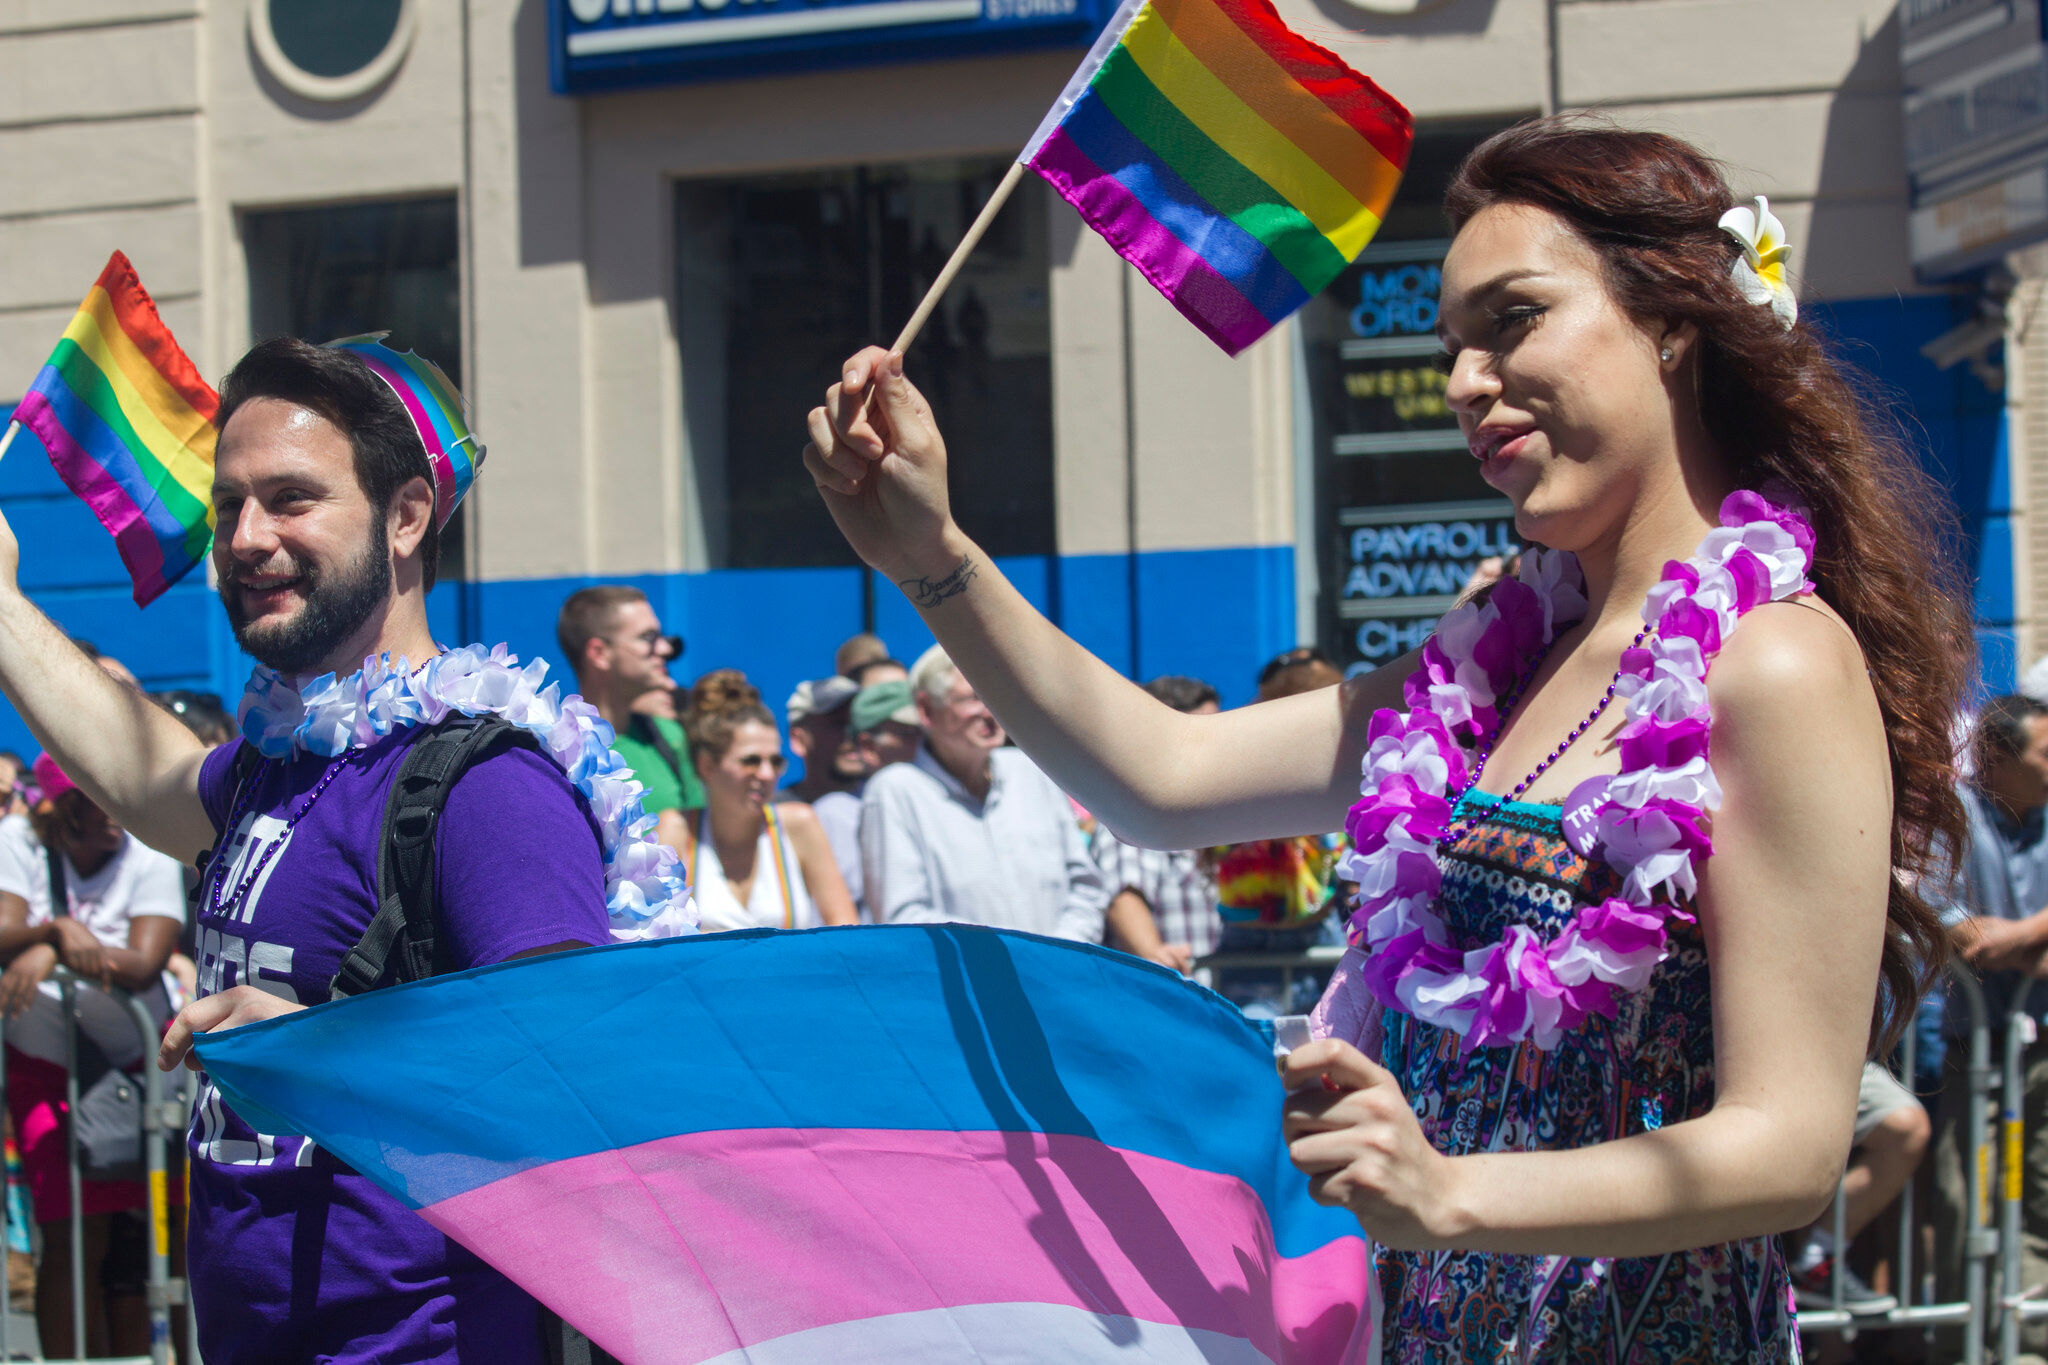 Nearly 50 years after Stonewall, trans people still feel excluded at pride